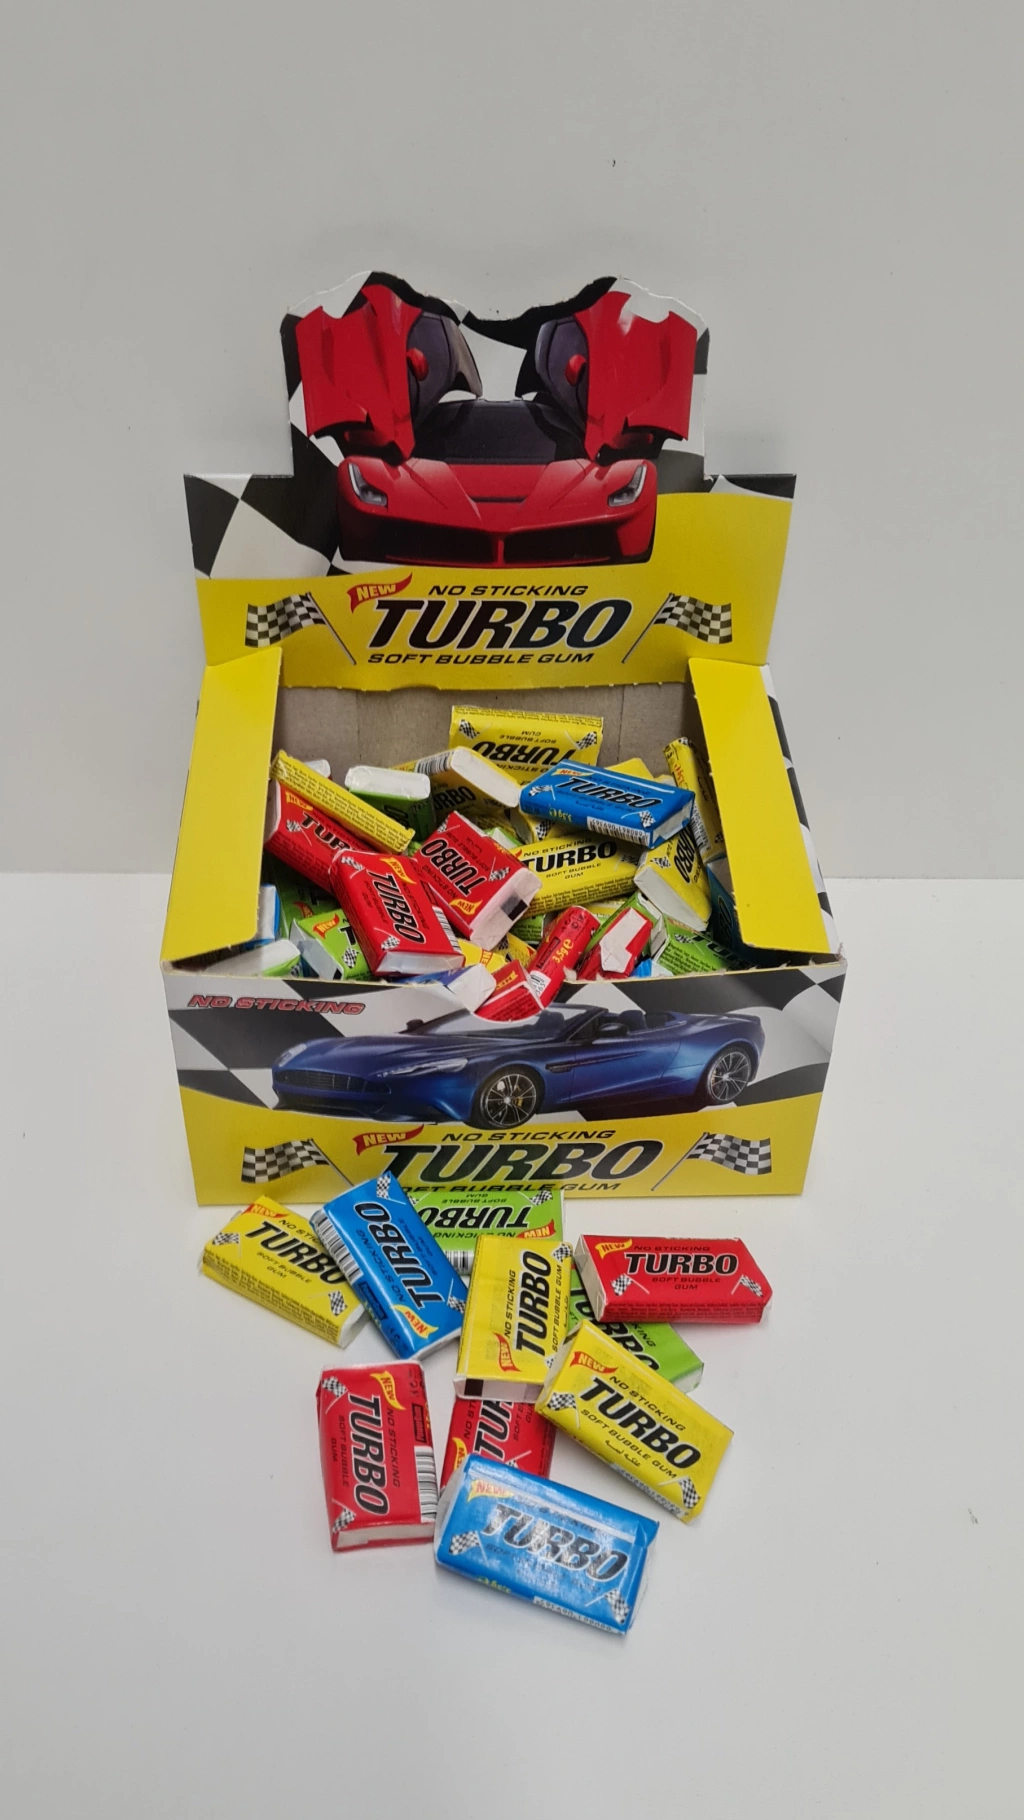 Turbo chewing gum in a box